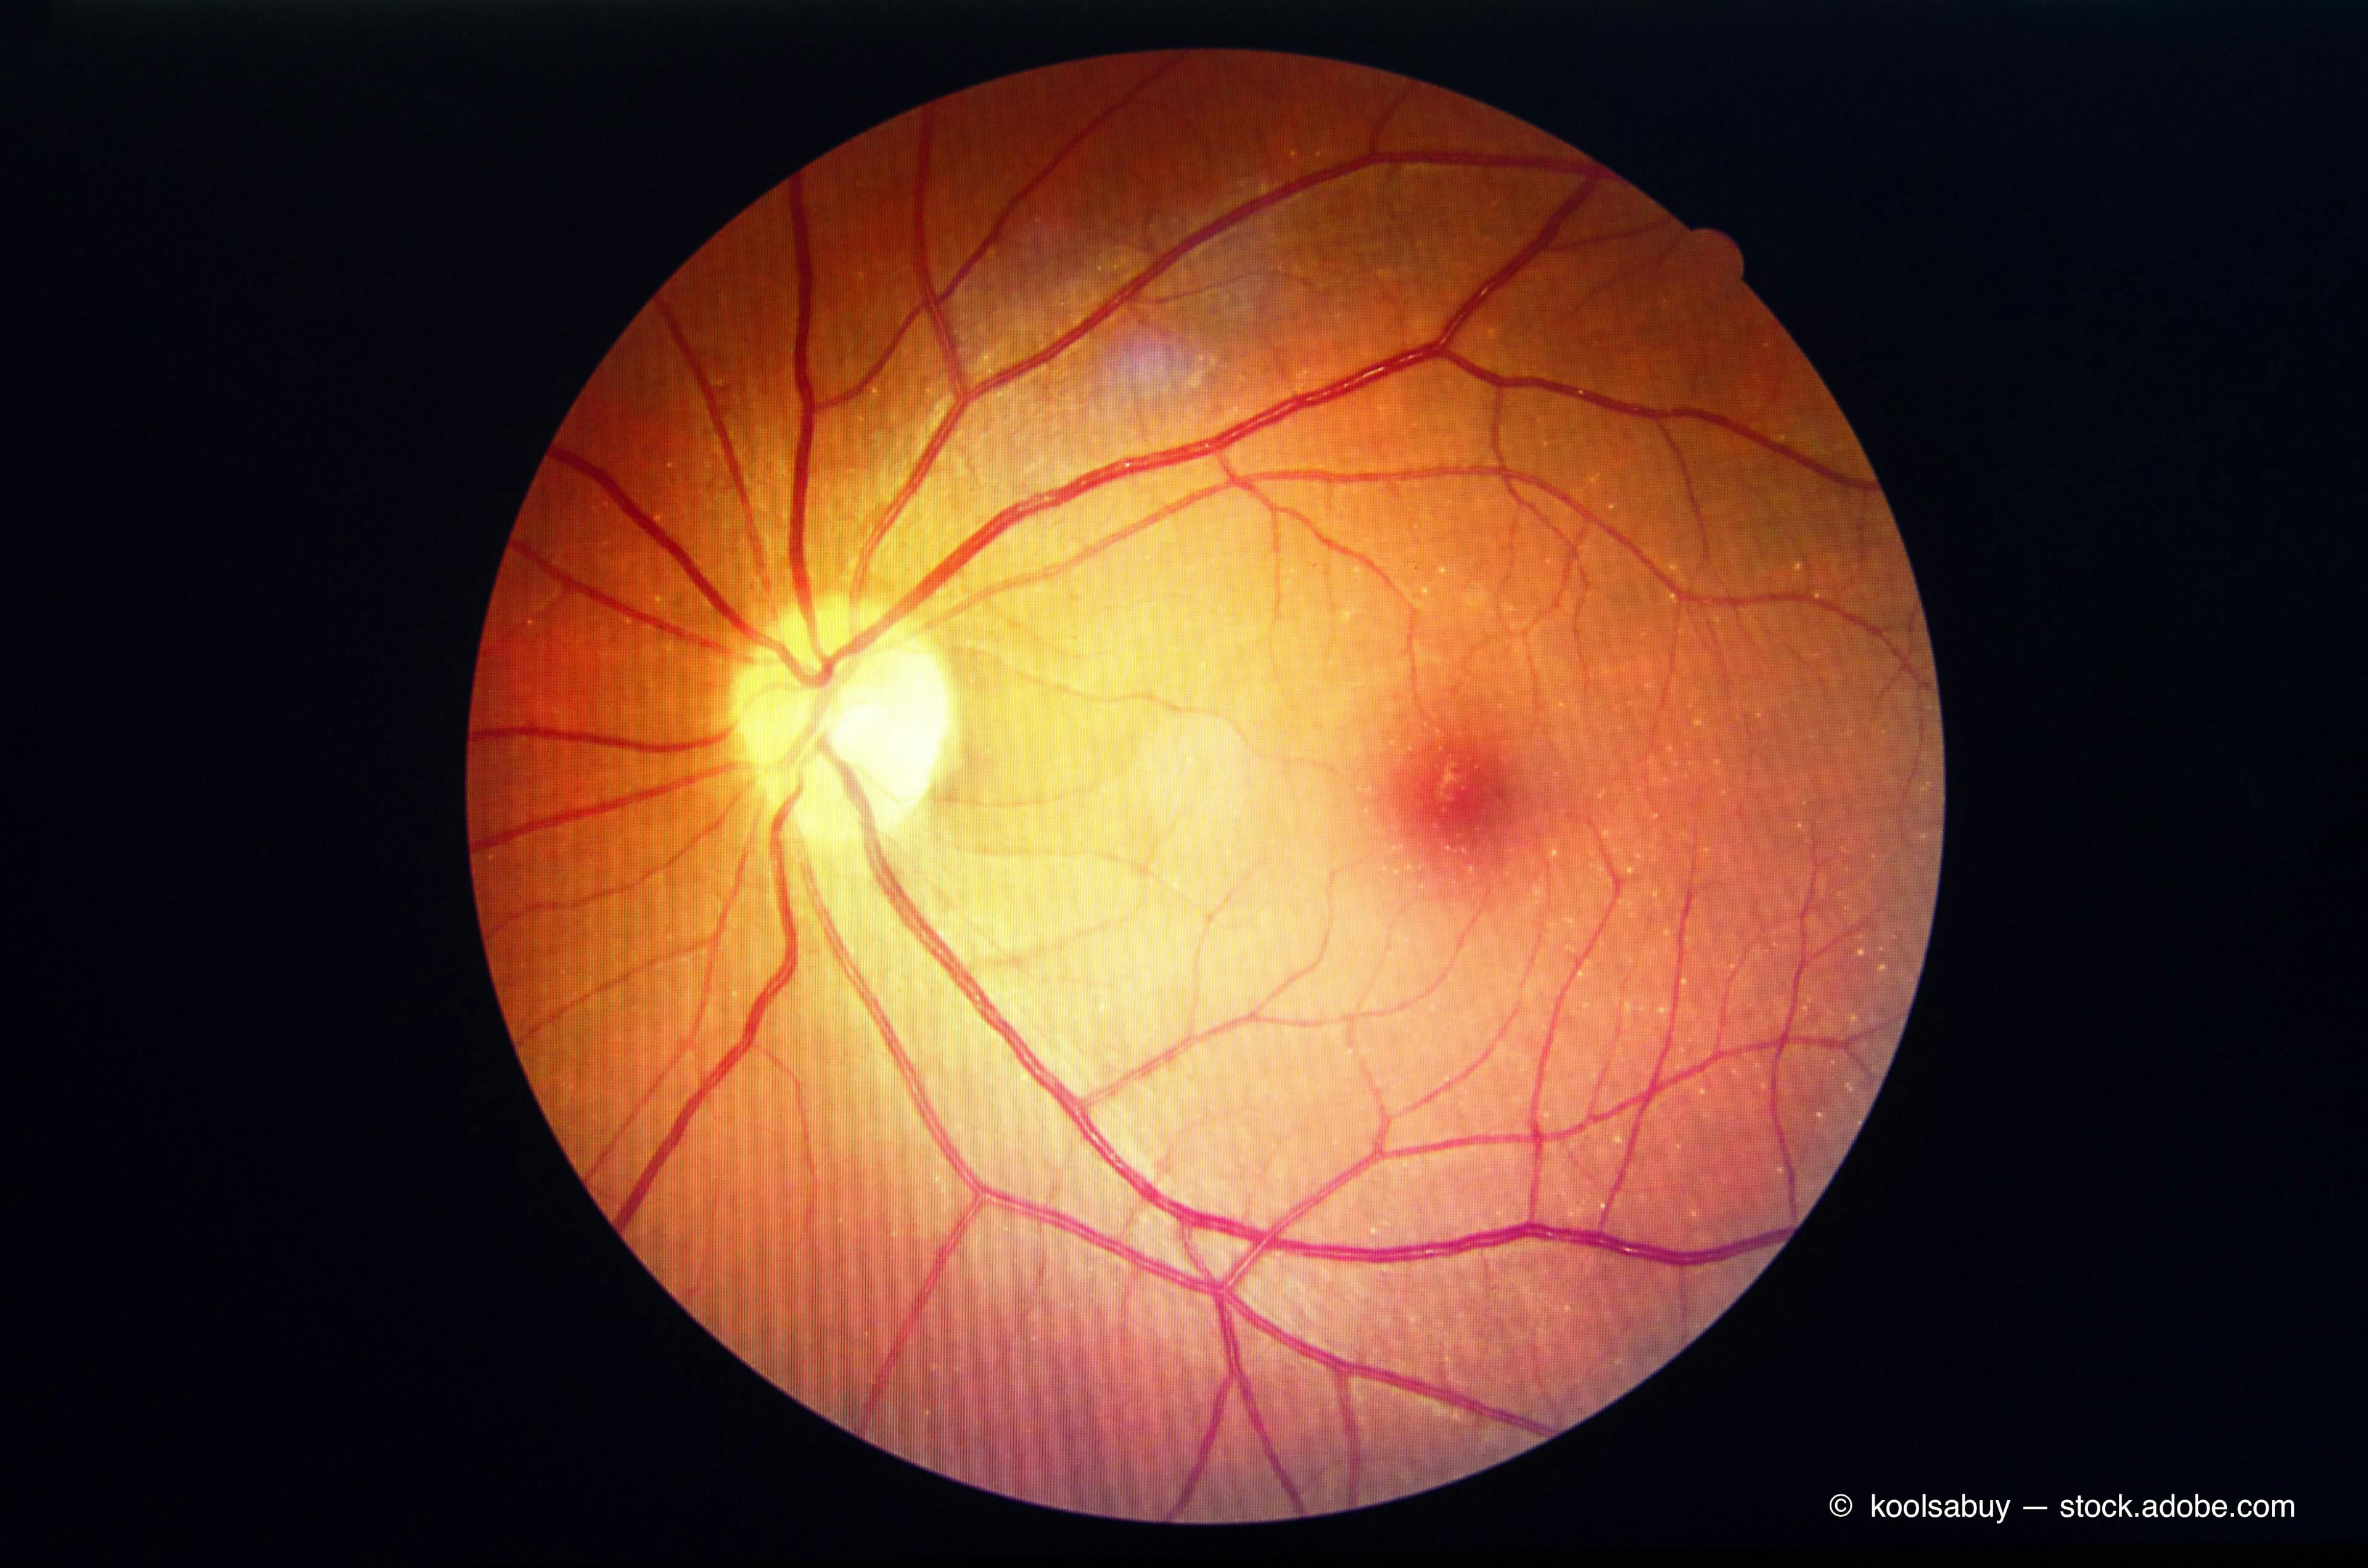 Retinal nonperfusion and leakage areas are important variables to consider when managing patients with nonproliferative diabetic retinopathy, according to PANORAMA investigators.